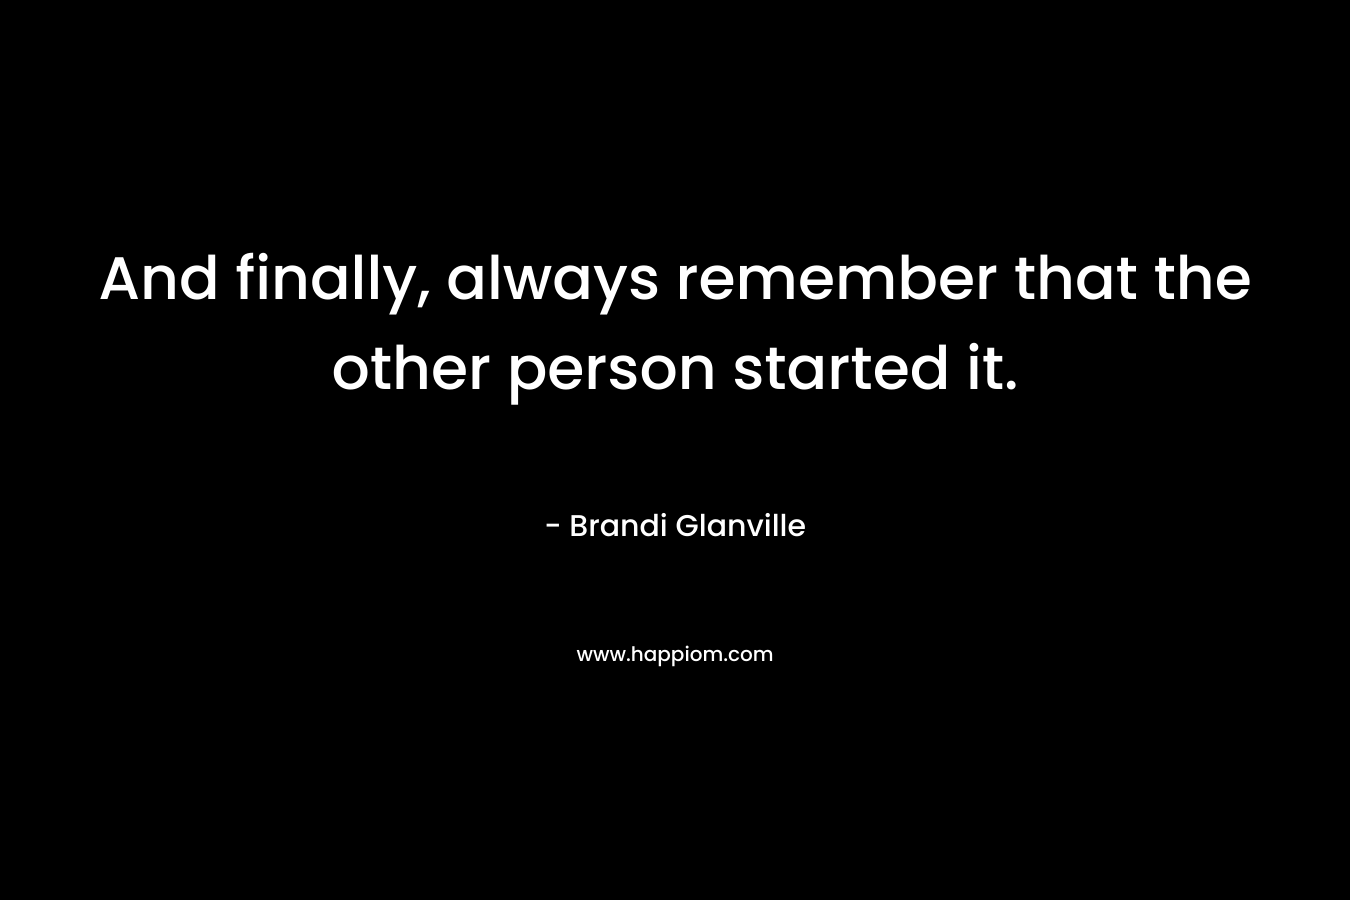 And finally, always remember that the other person started it.